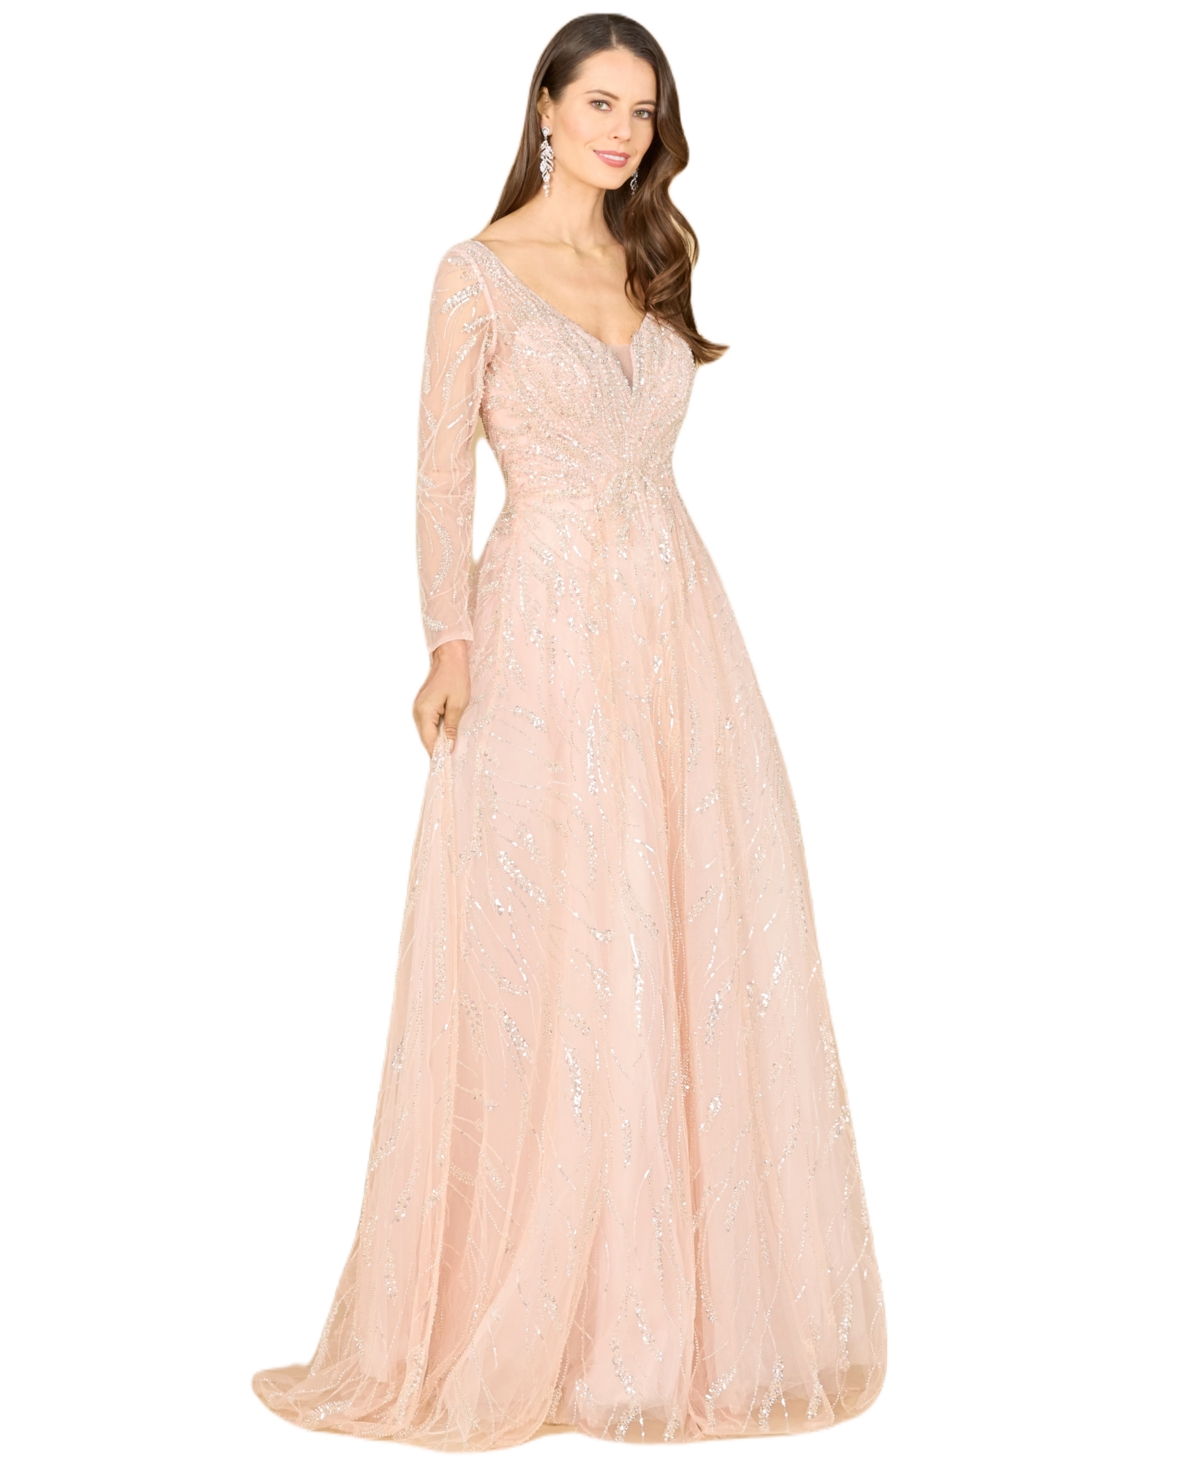 1950s Formal Dresses & Evening Gowns to Buy Lara Womens Long Sleeve Beaded Lace Gown - Powder pink $698.00 AT vintagedancer.com